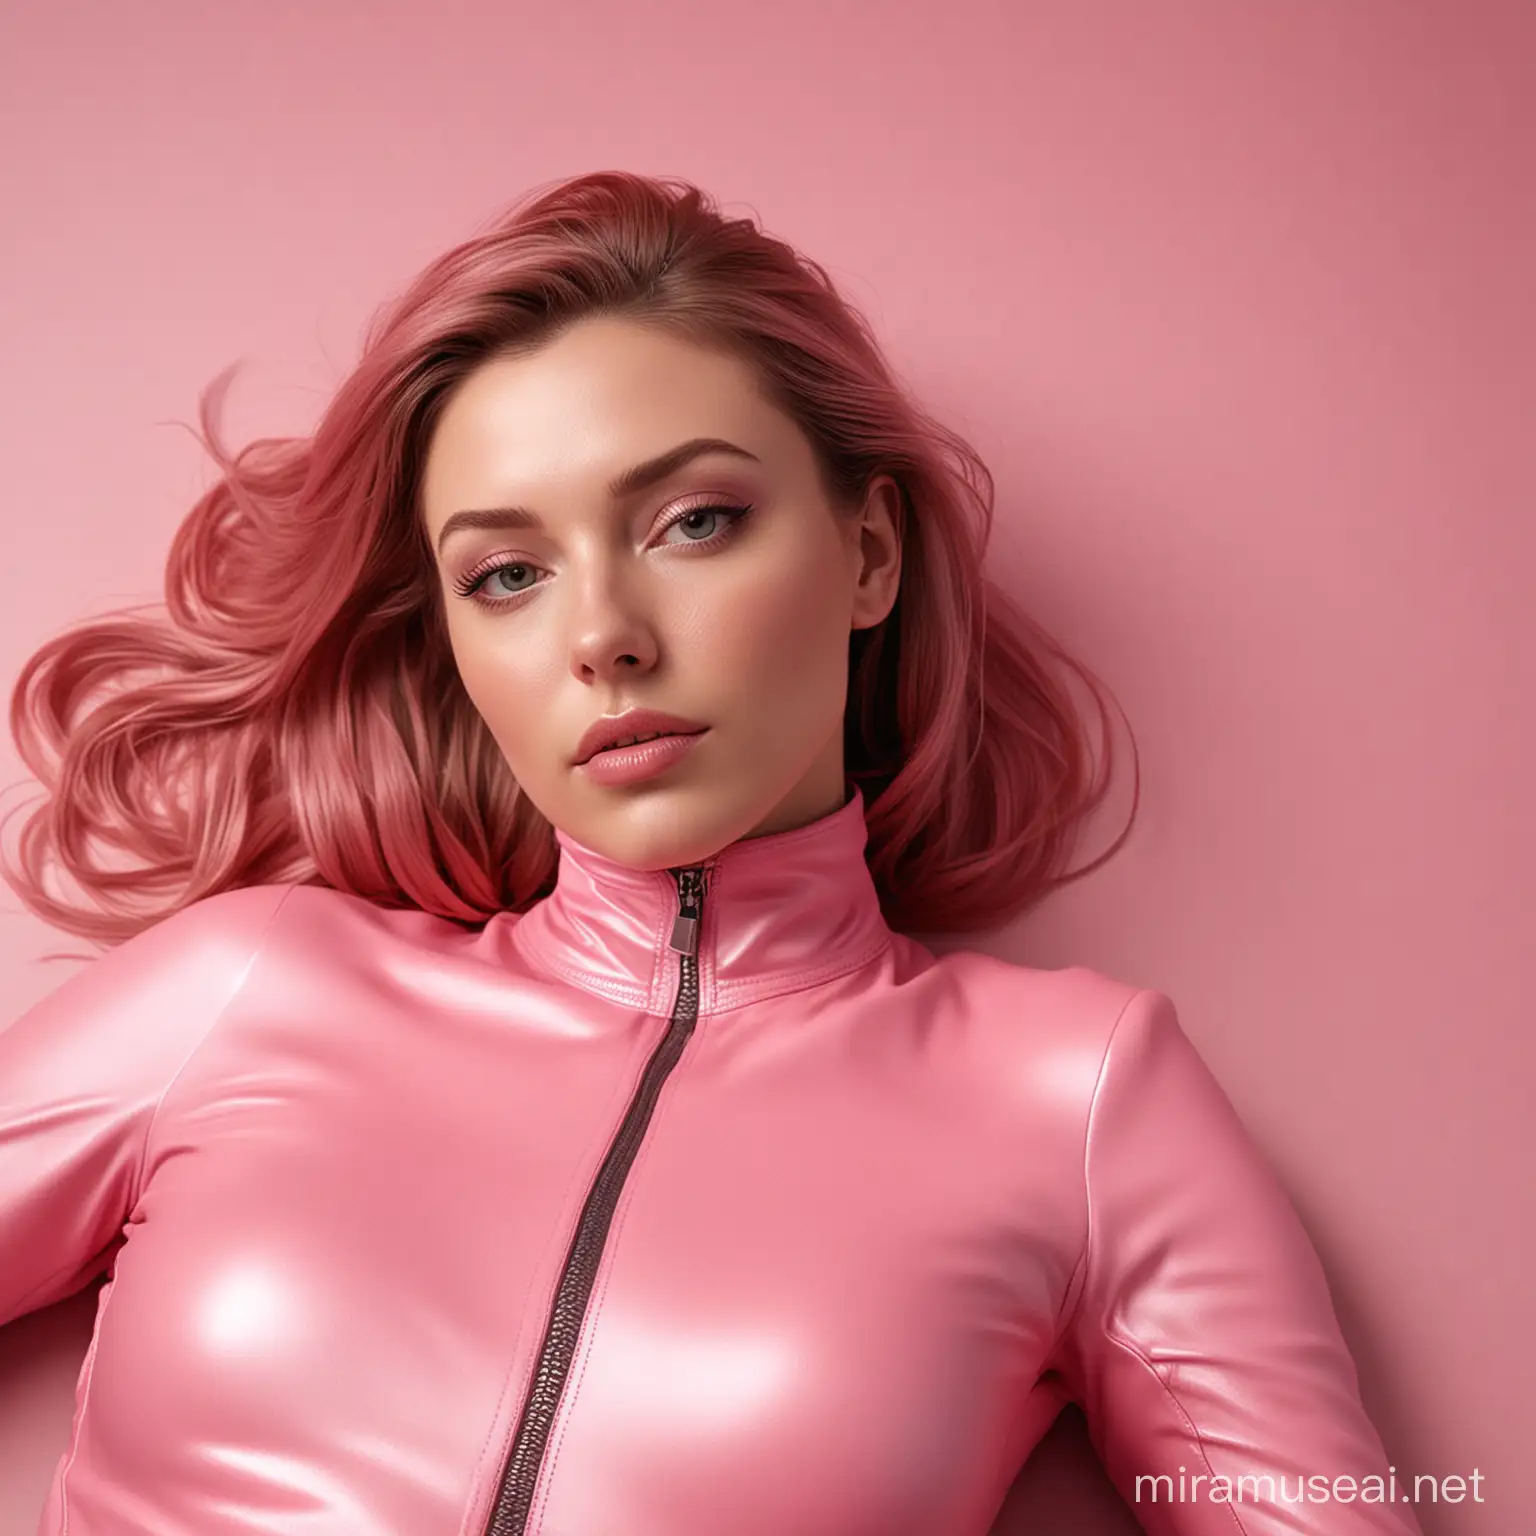 Stylish Woman in Pink Catsuit Leaning Forward